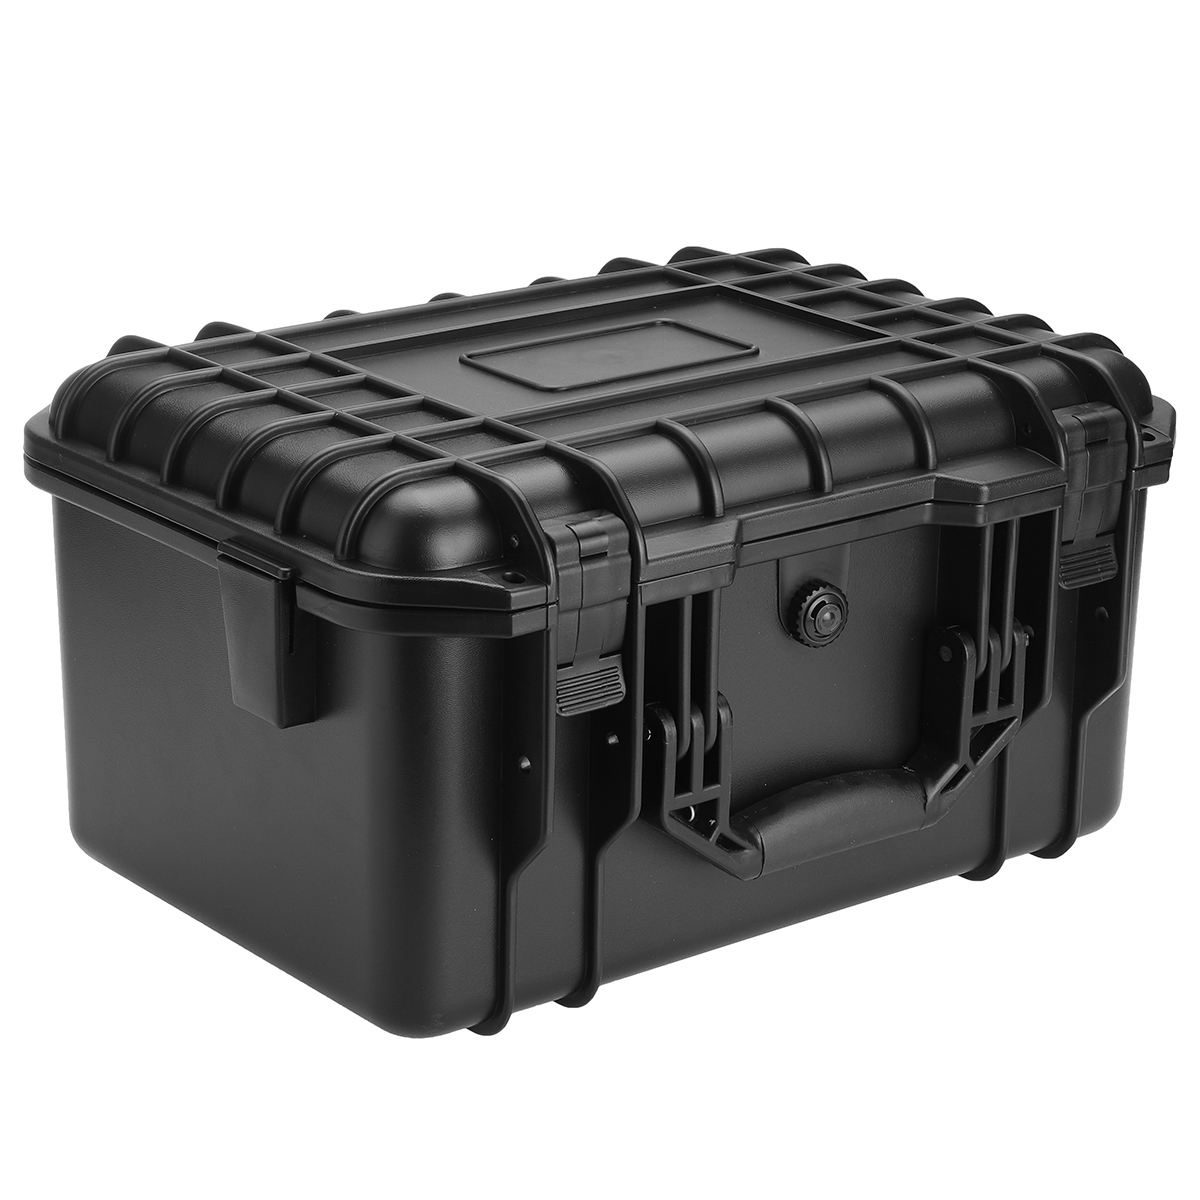 Plastic-Packaging-Box-Waterproof-Instrument-Safety-Protection-Tool-Box-Box-Portable-Abs-Waterproof-T-1853437-1